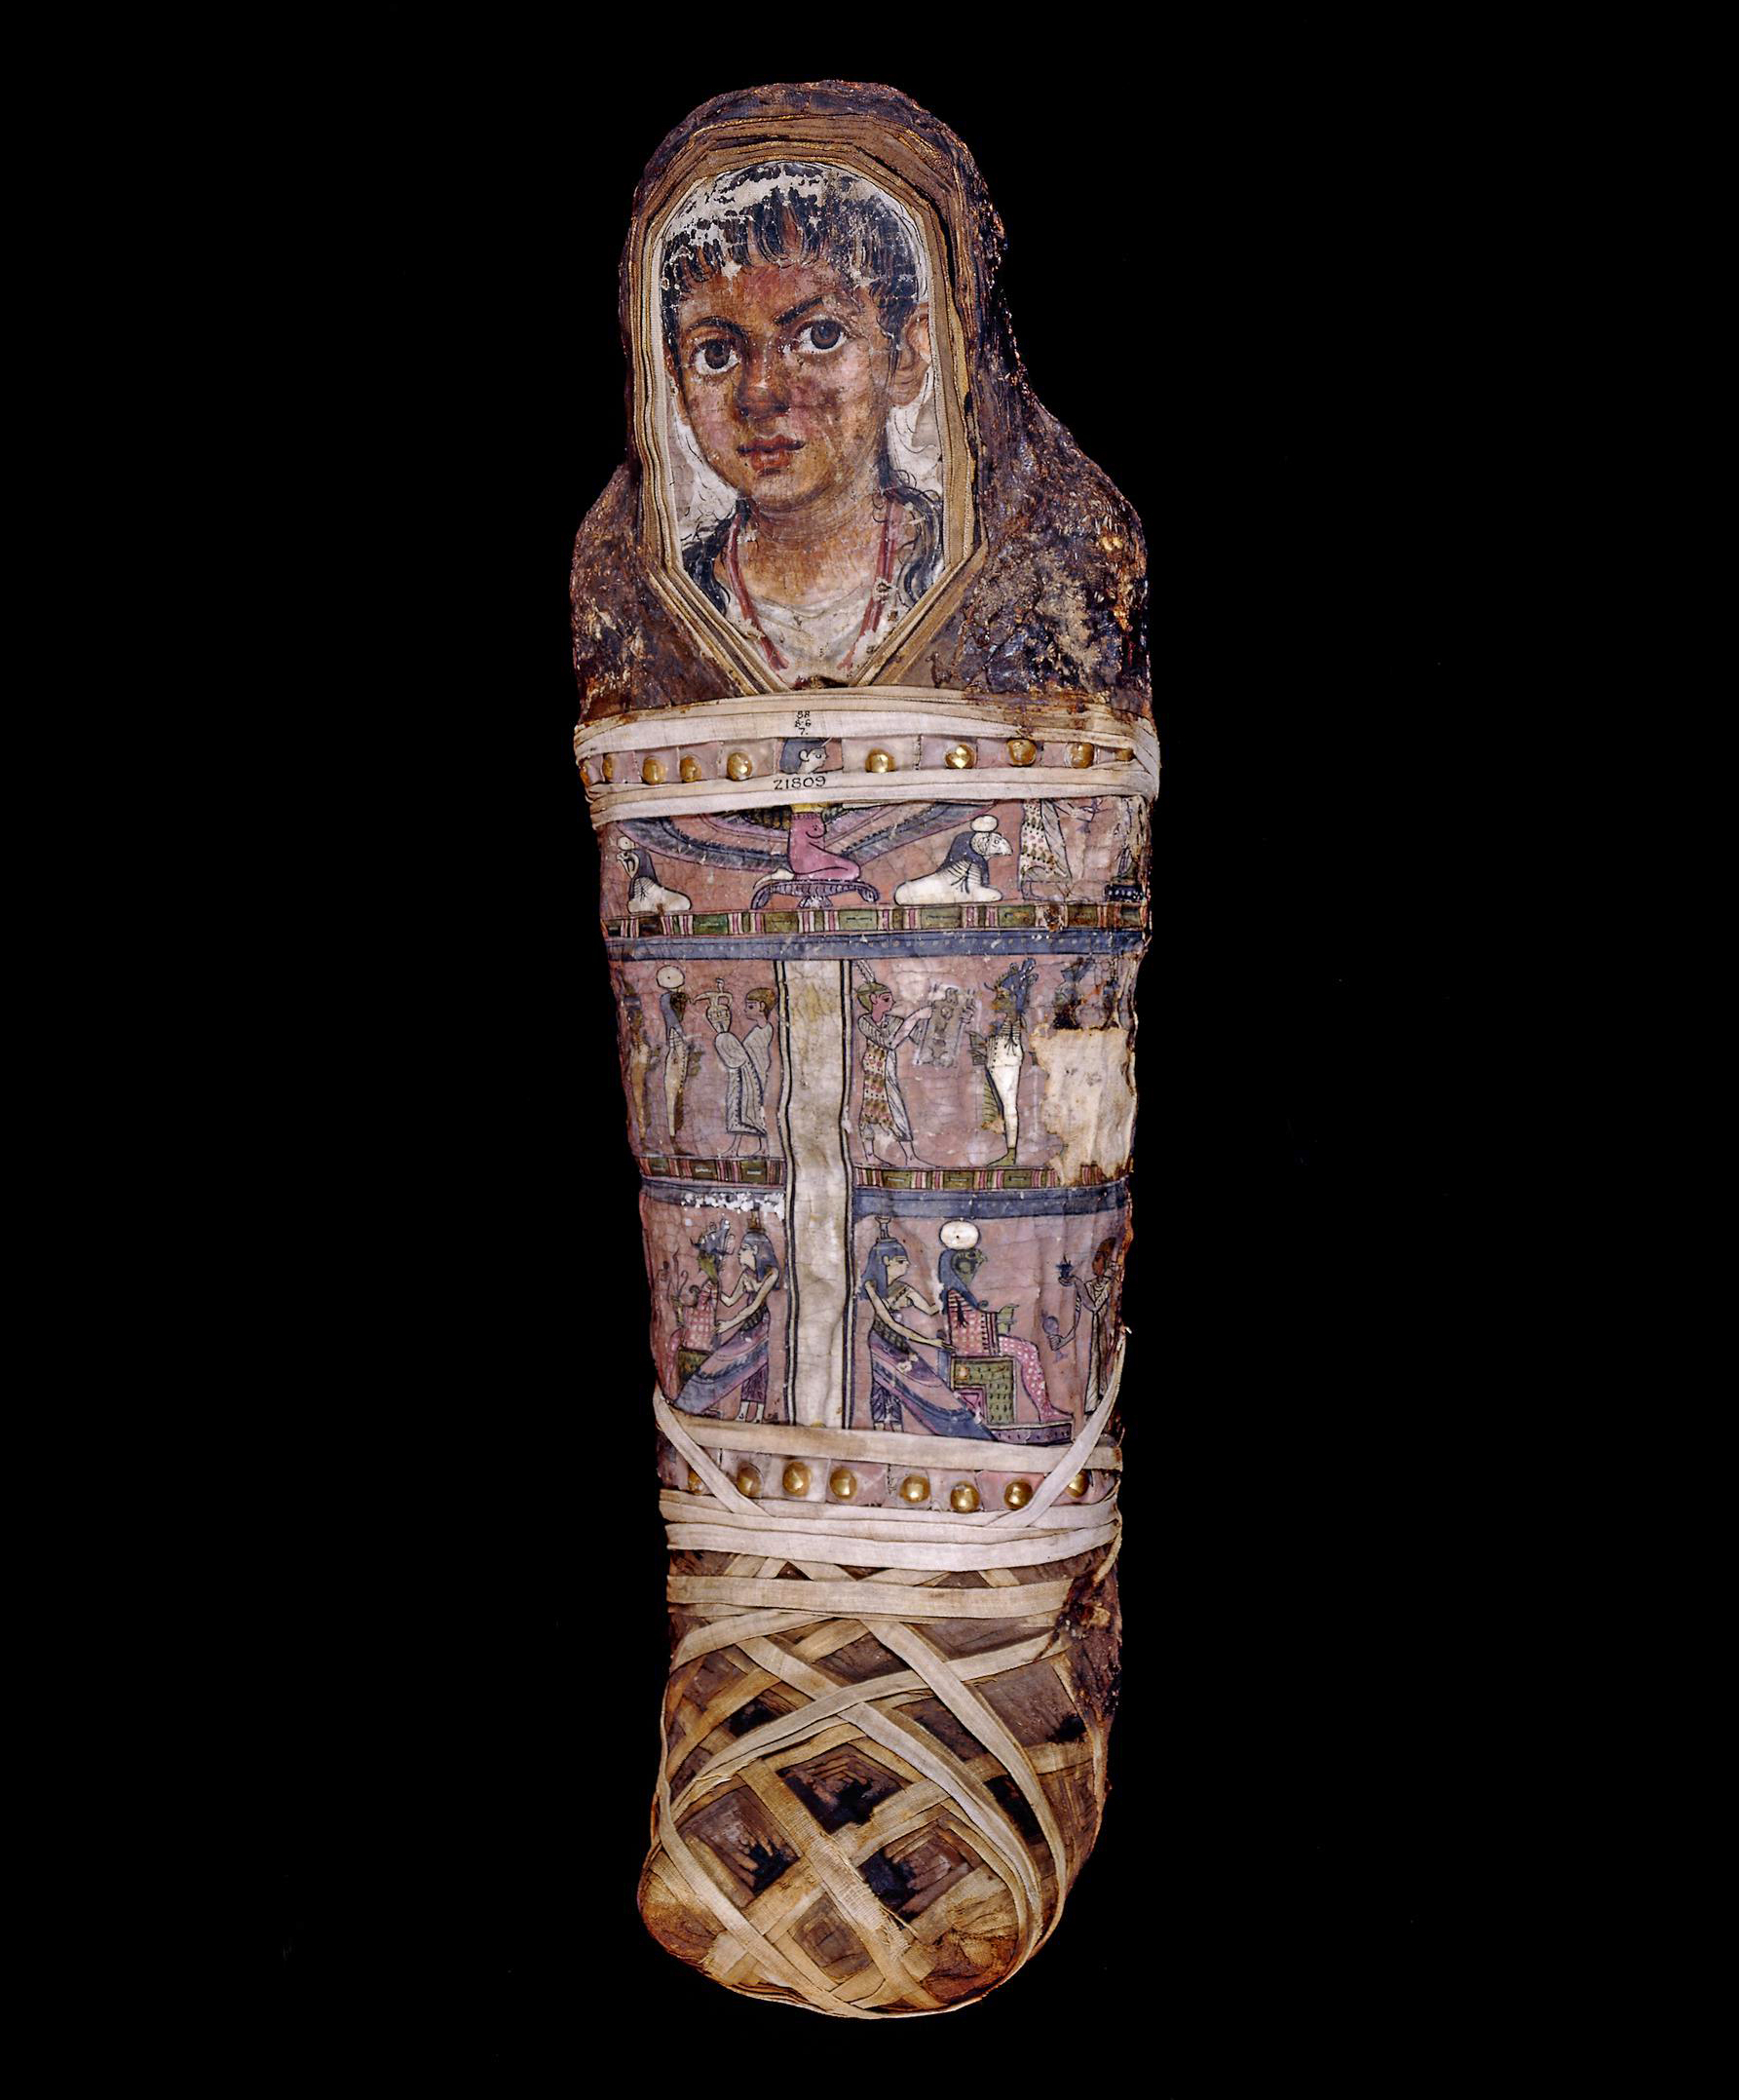 A mummy of the young boy from Egypt and his portrait, dated to c.40-55 AD.jpg